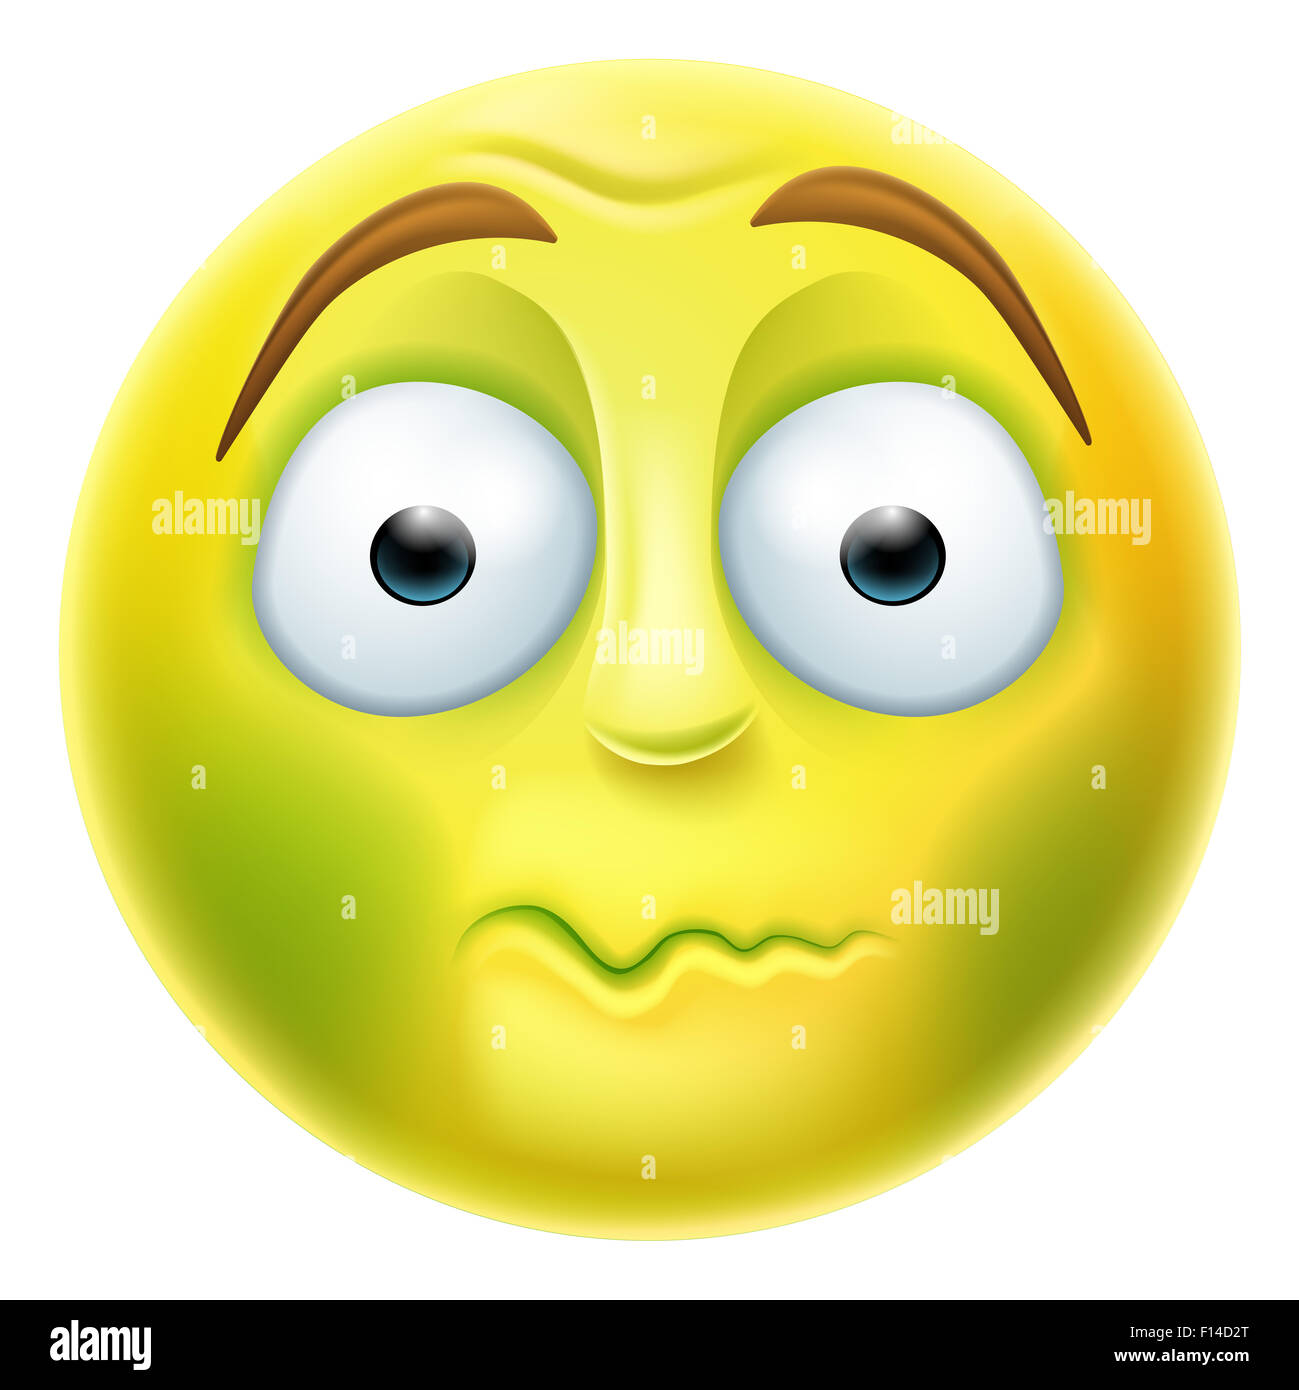 Sick looking green emoji emoticon nauseated or about to vomit Stock Photo